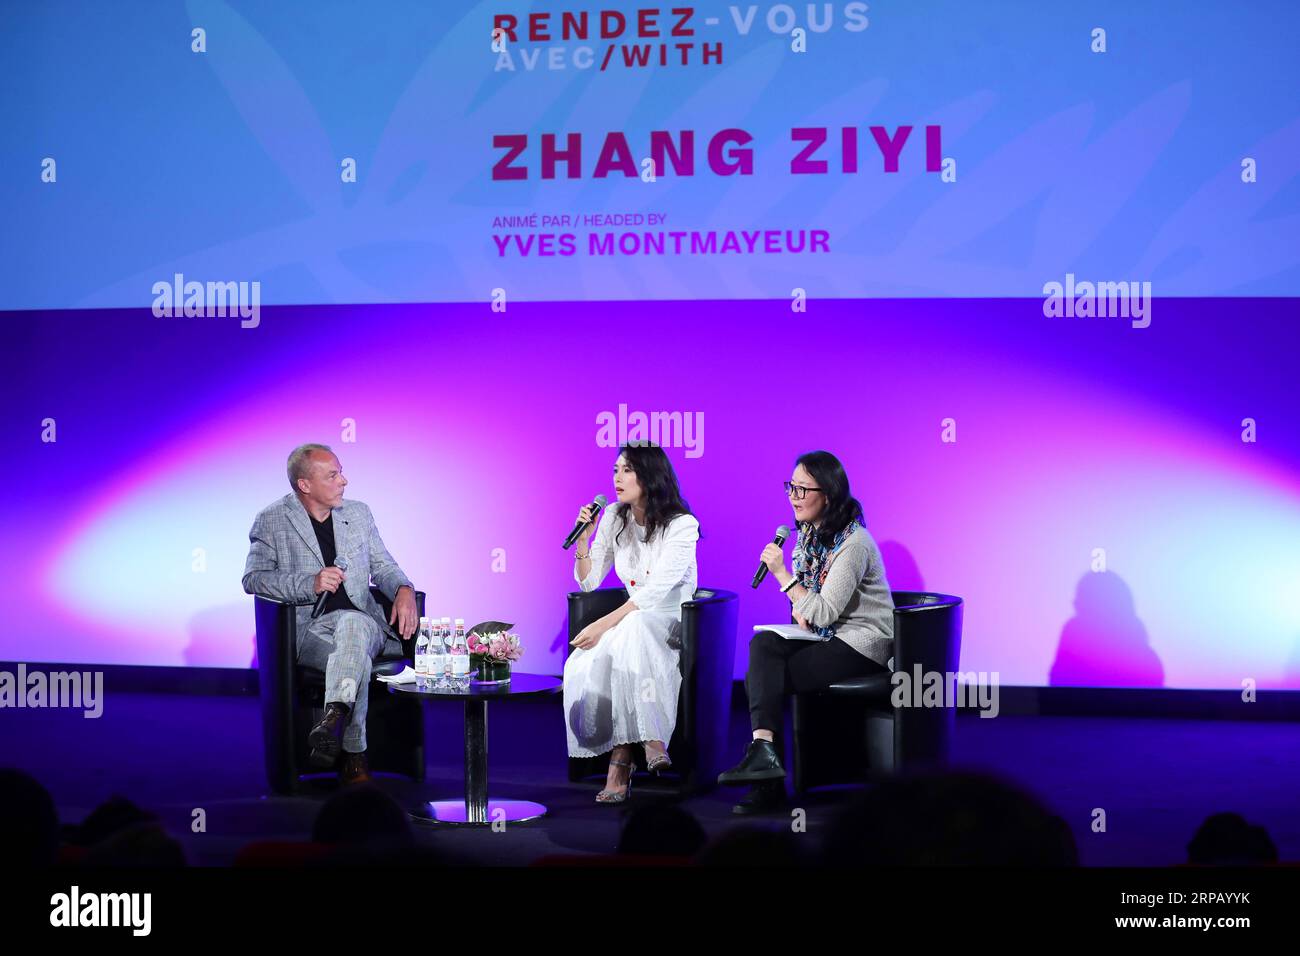 (190523) -- CANNES, May 23, 2019 (Xinhua) -- Chinese actress Zhang Ziyi (C) attends the masterclass at the 72nd Cannes Film Festival in Cannes, France, May 22, 2019. Zhang Ziyi was invited to talk about her career at this year s masterclass together with American actor Sylvester Stallone, French actor Alain Delon and Danish director Nicolas Winding Refn. The 72nd Cannes Film Festival is held from May 14 to 25. (Xinhua/Zhang Cheng) FRANCE-CANNES-FILM FESTIVAL-ZHANG ZIYI PUBLICATIONxNOTxINxCHN Stock Photo